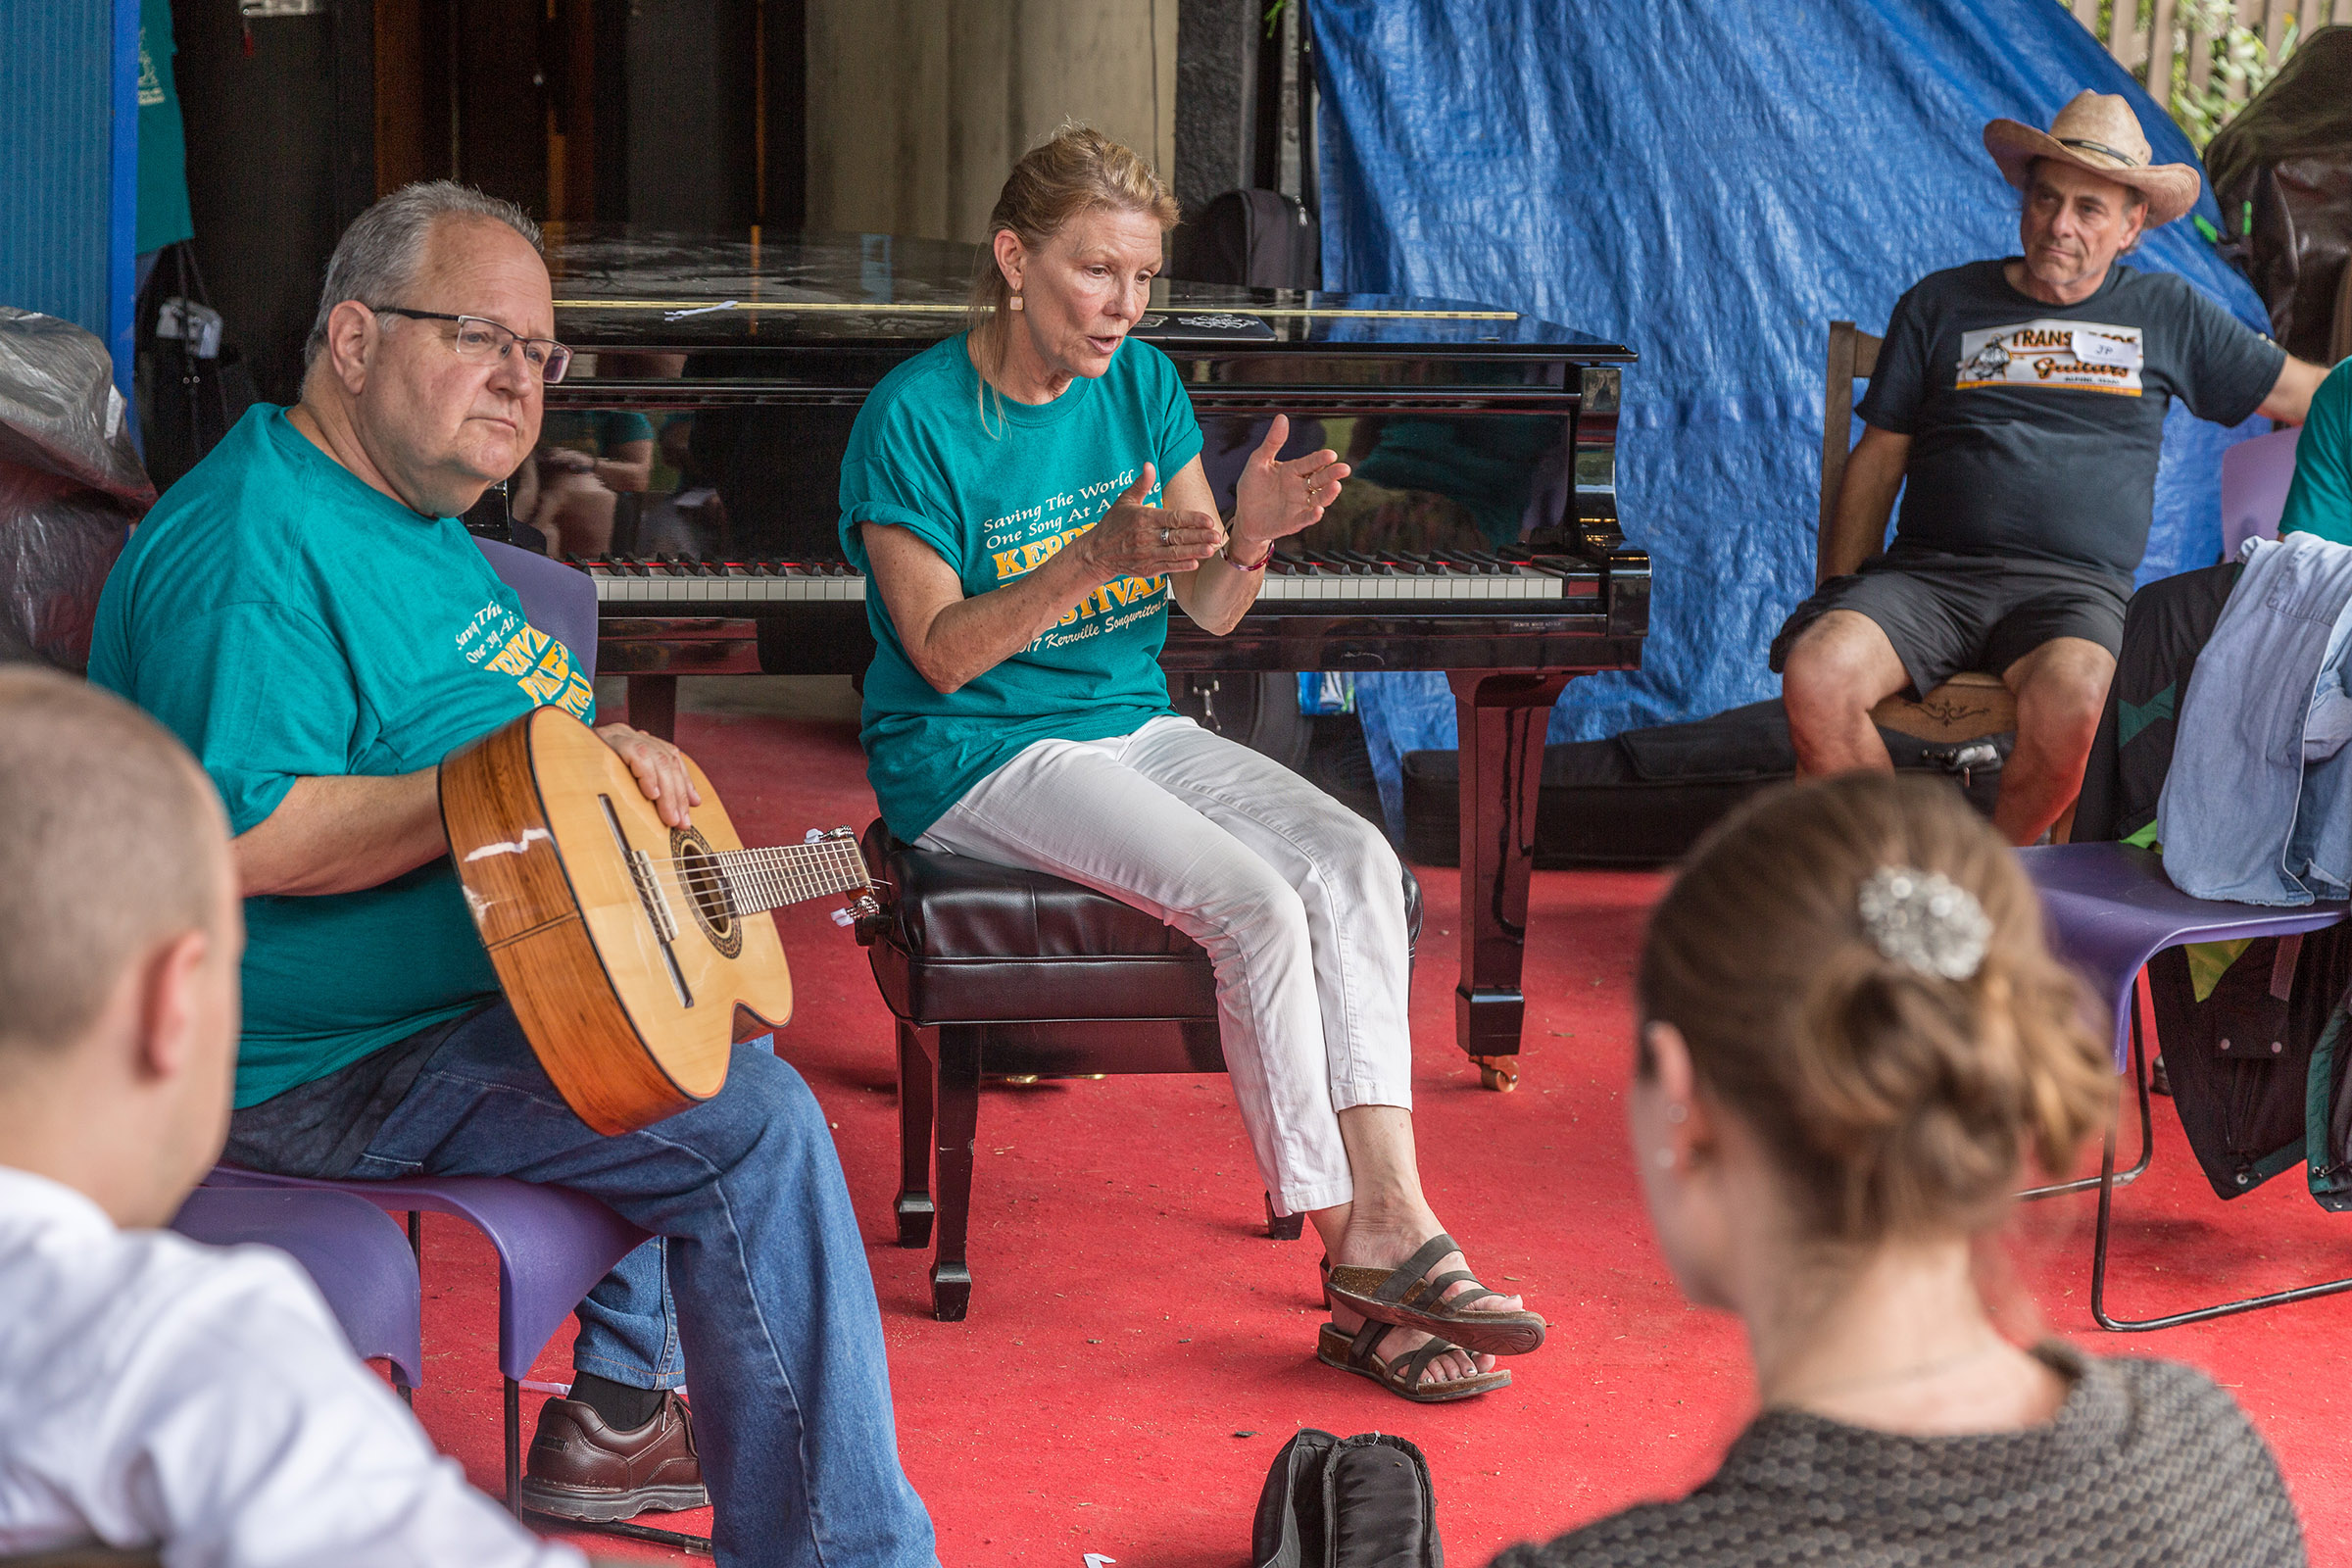 A man with a guitar and a woman expressing a thought with her hands work with songwriters in a circle